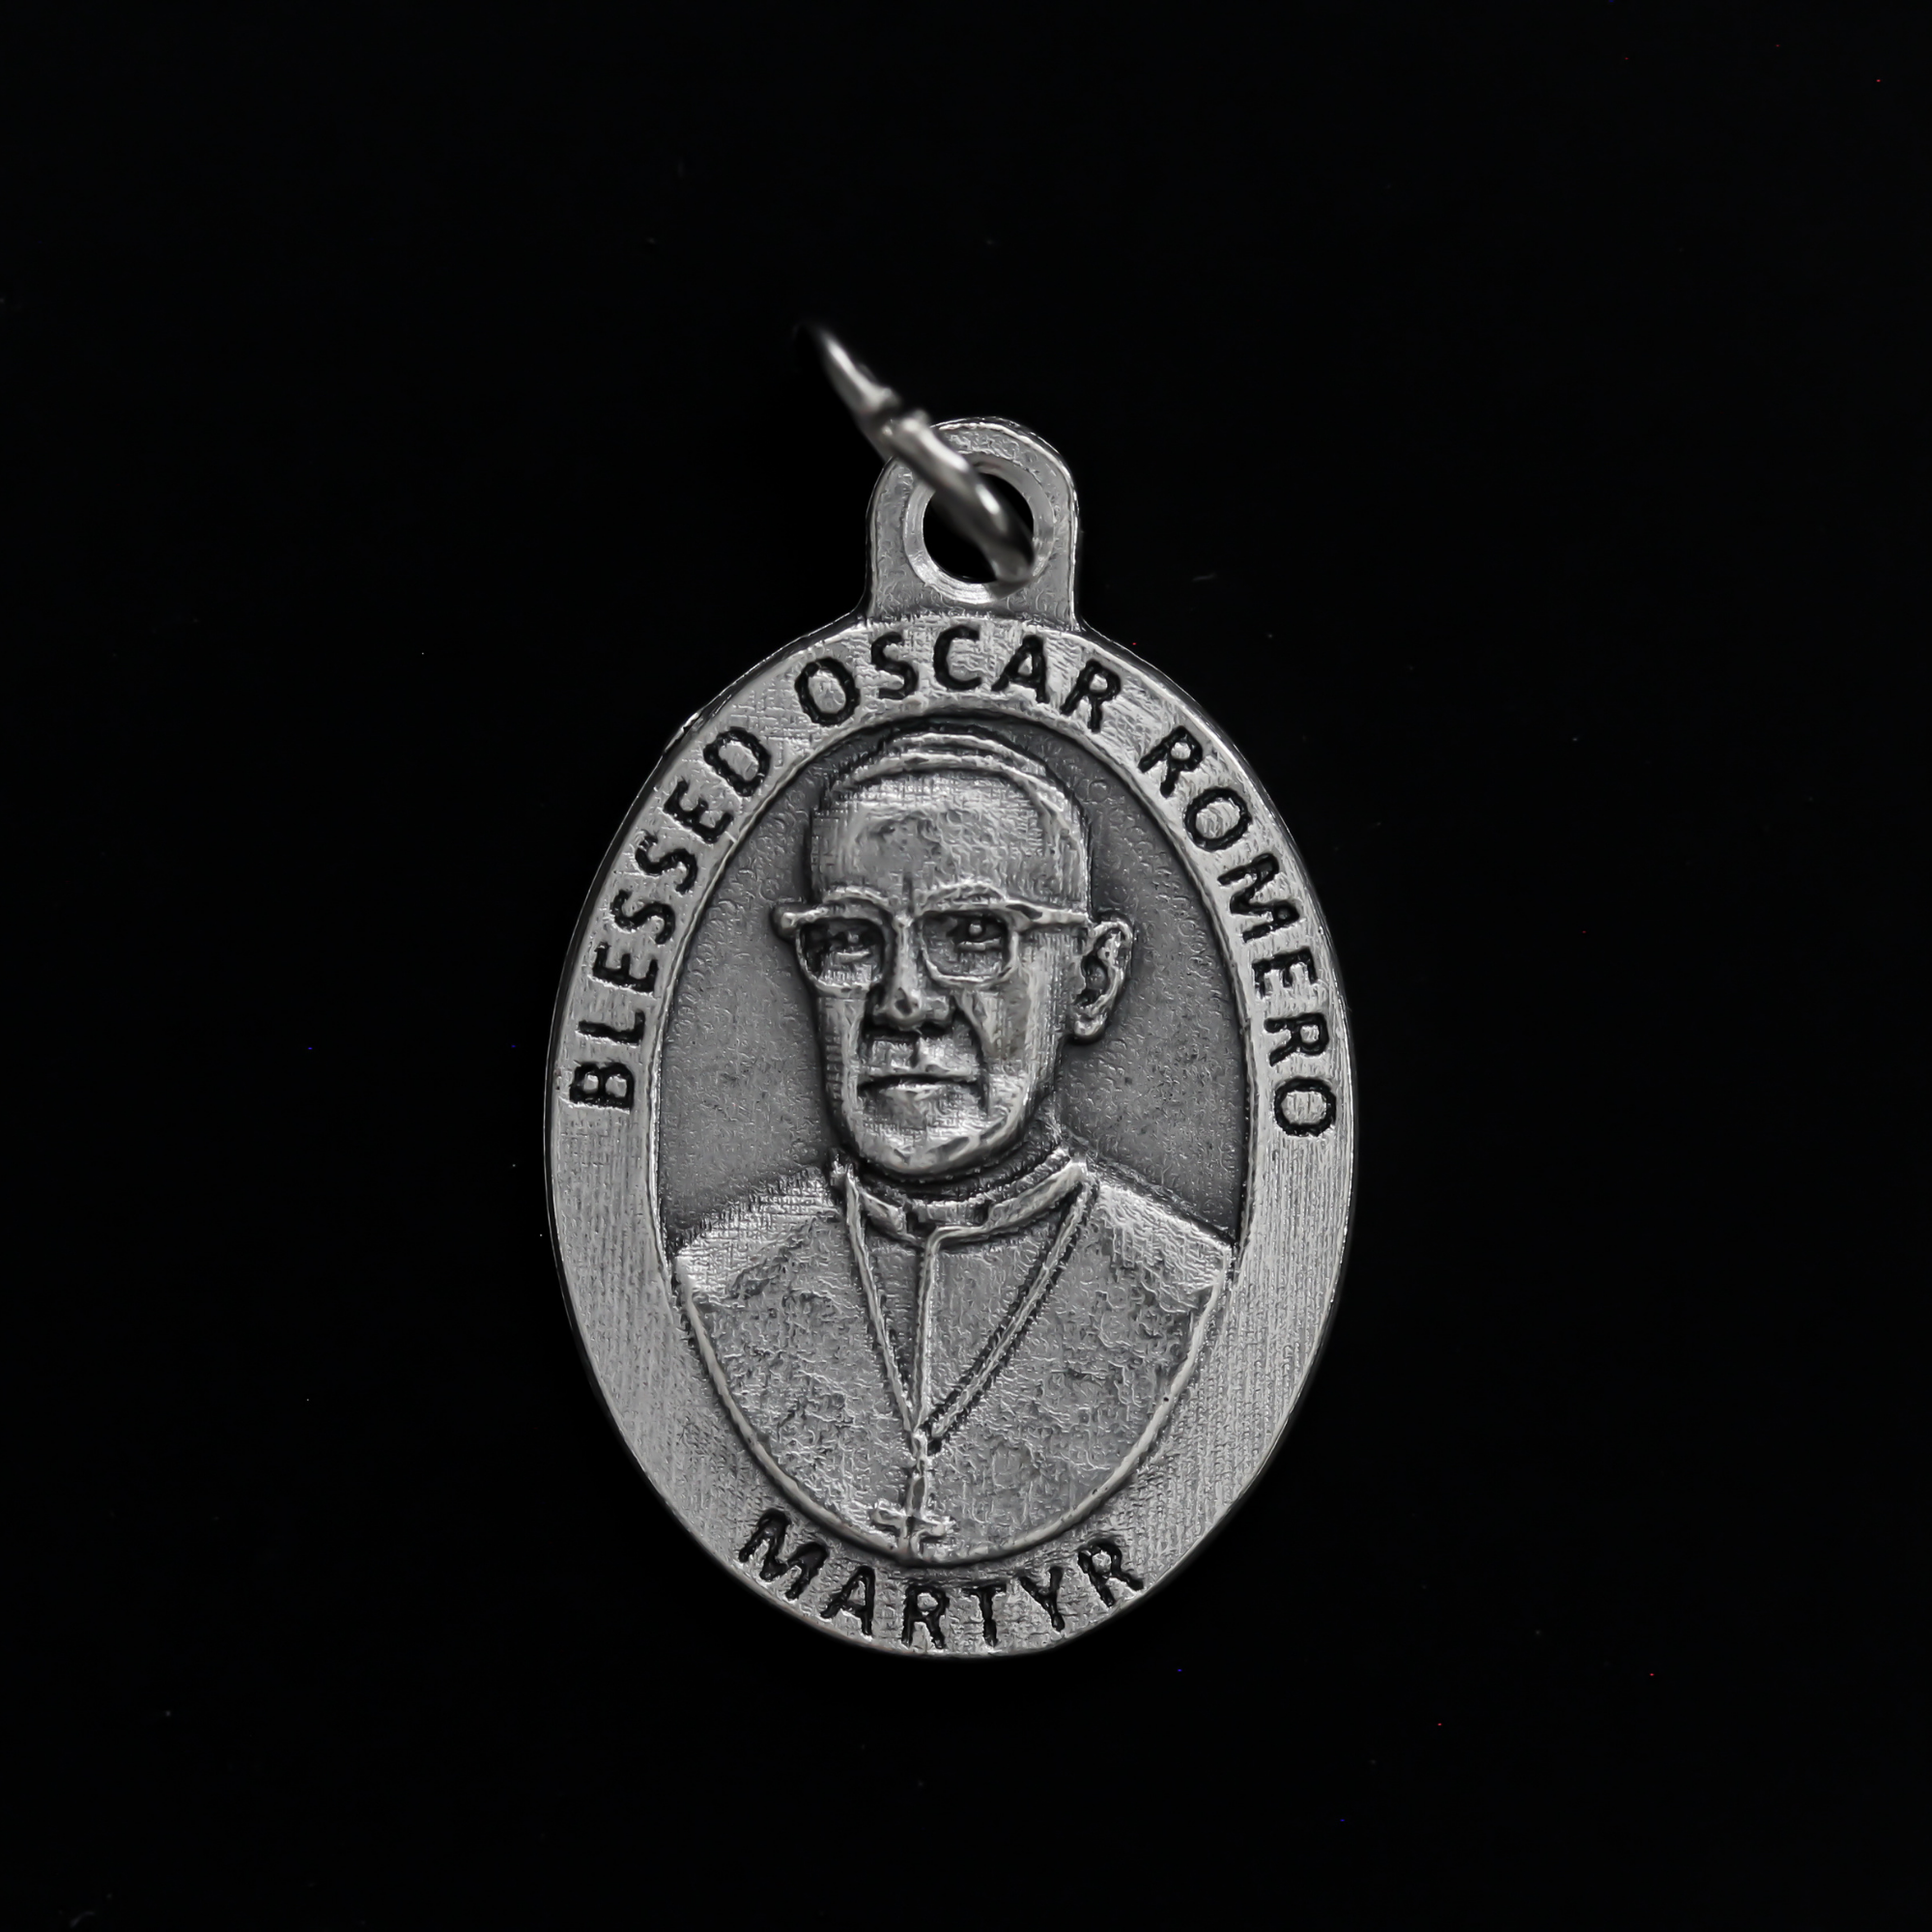 Blessed Óscar Romero medal that depicts the saint on the front and the reverse side is marked "Pray For Us"